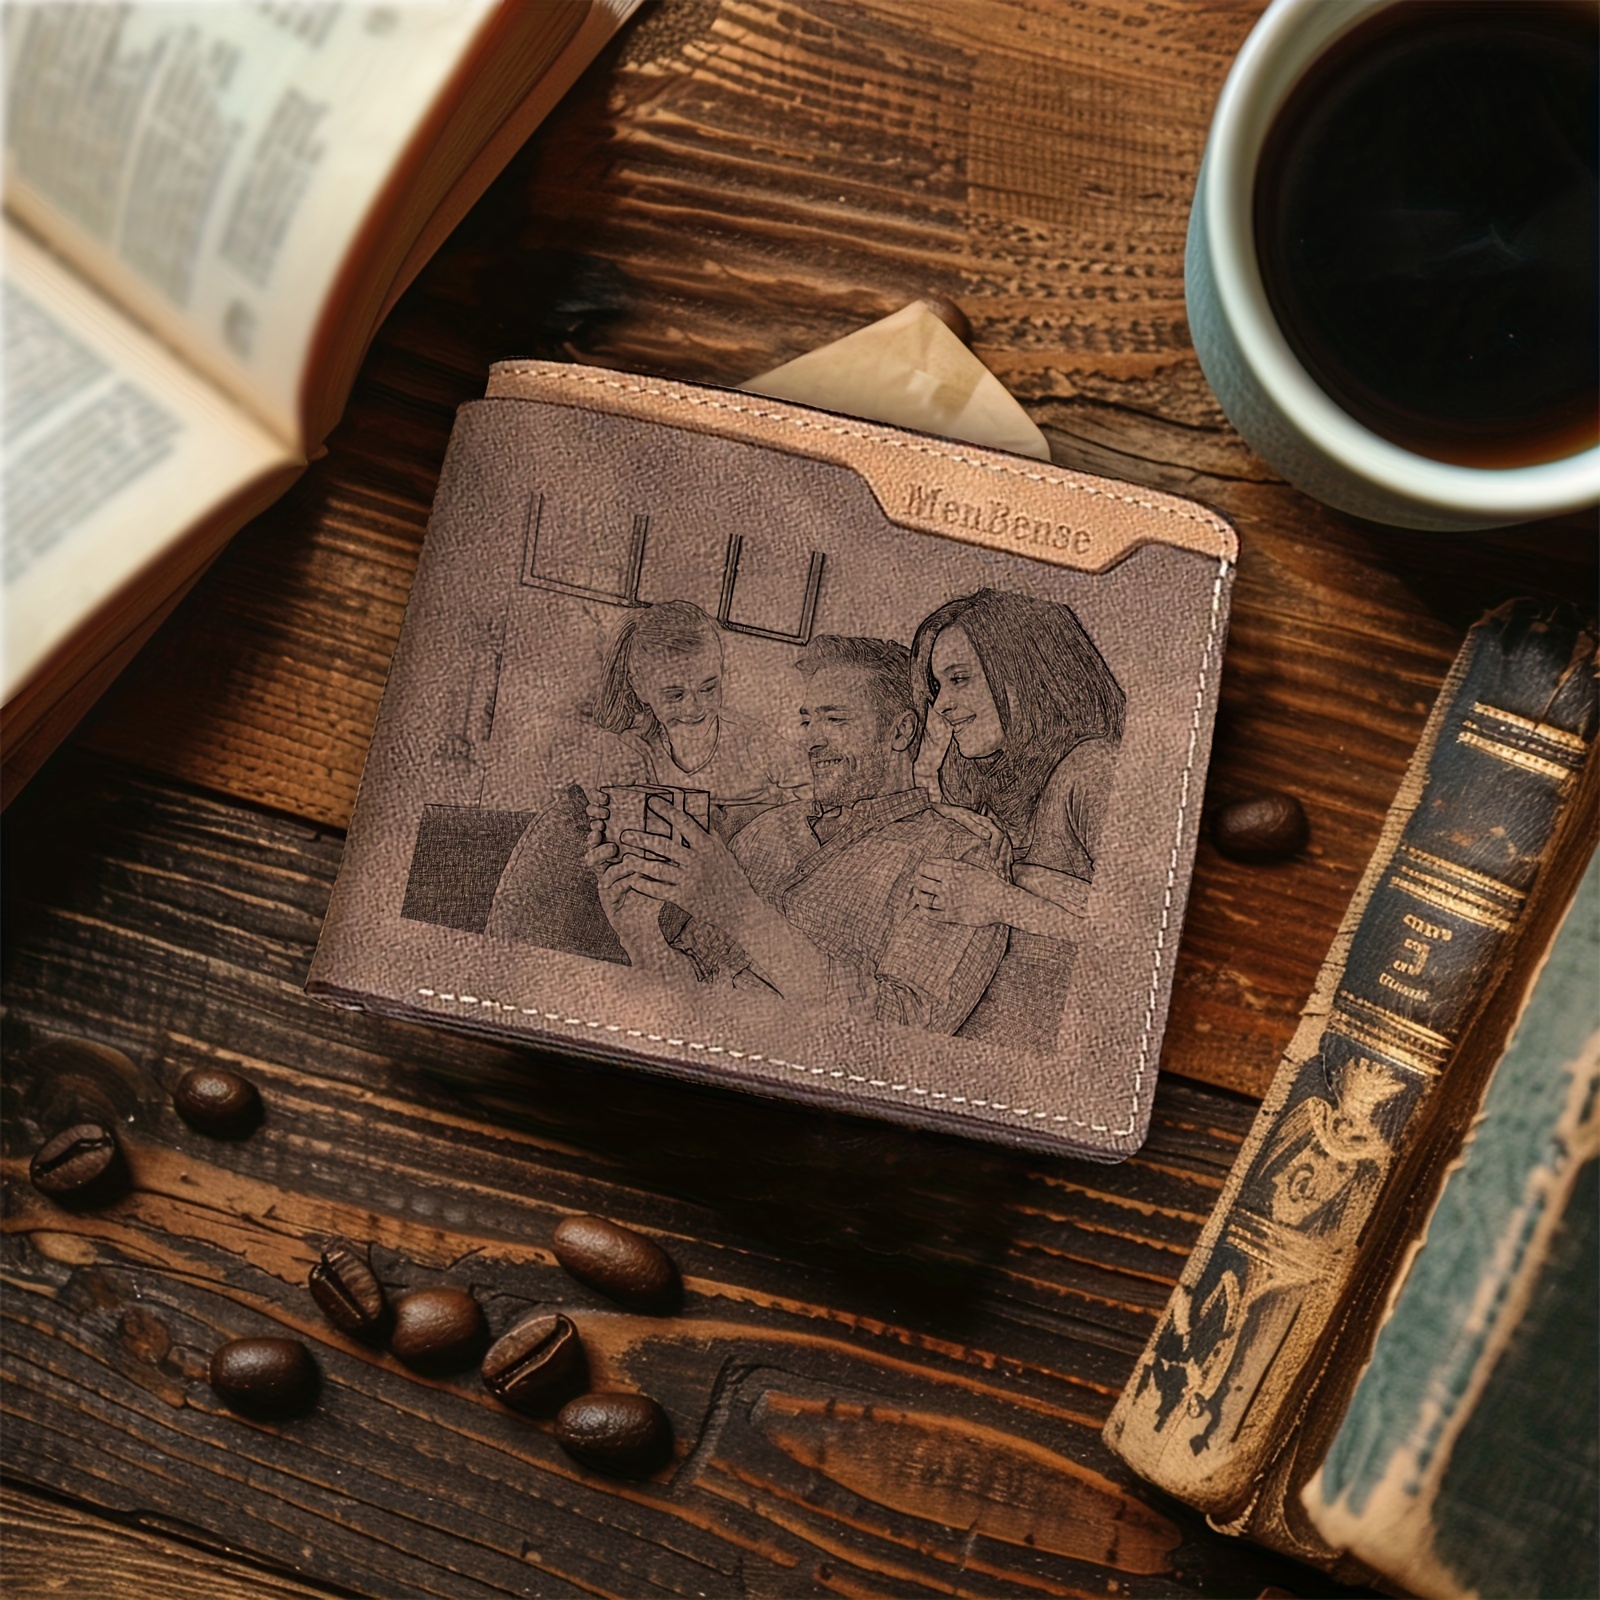 

Wallet For Men, Customized Personalized Photo, Engraved With Pictures And Names, Gift For Father's Day, Dad, Boyfriend, Husband, Anniversary Gift